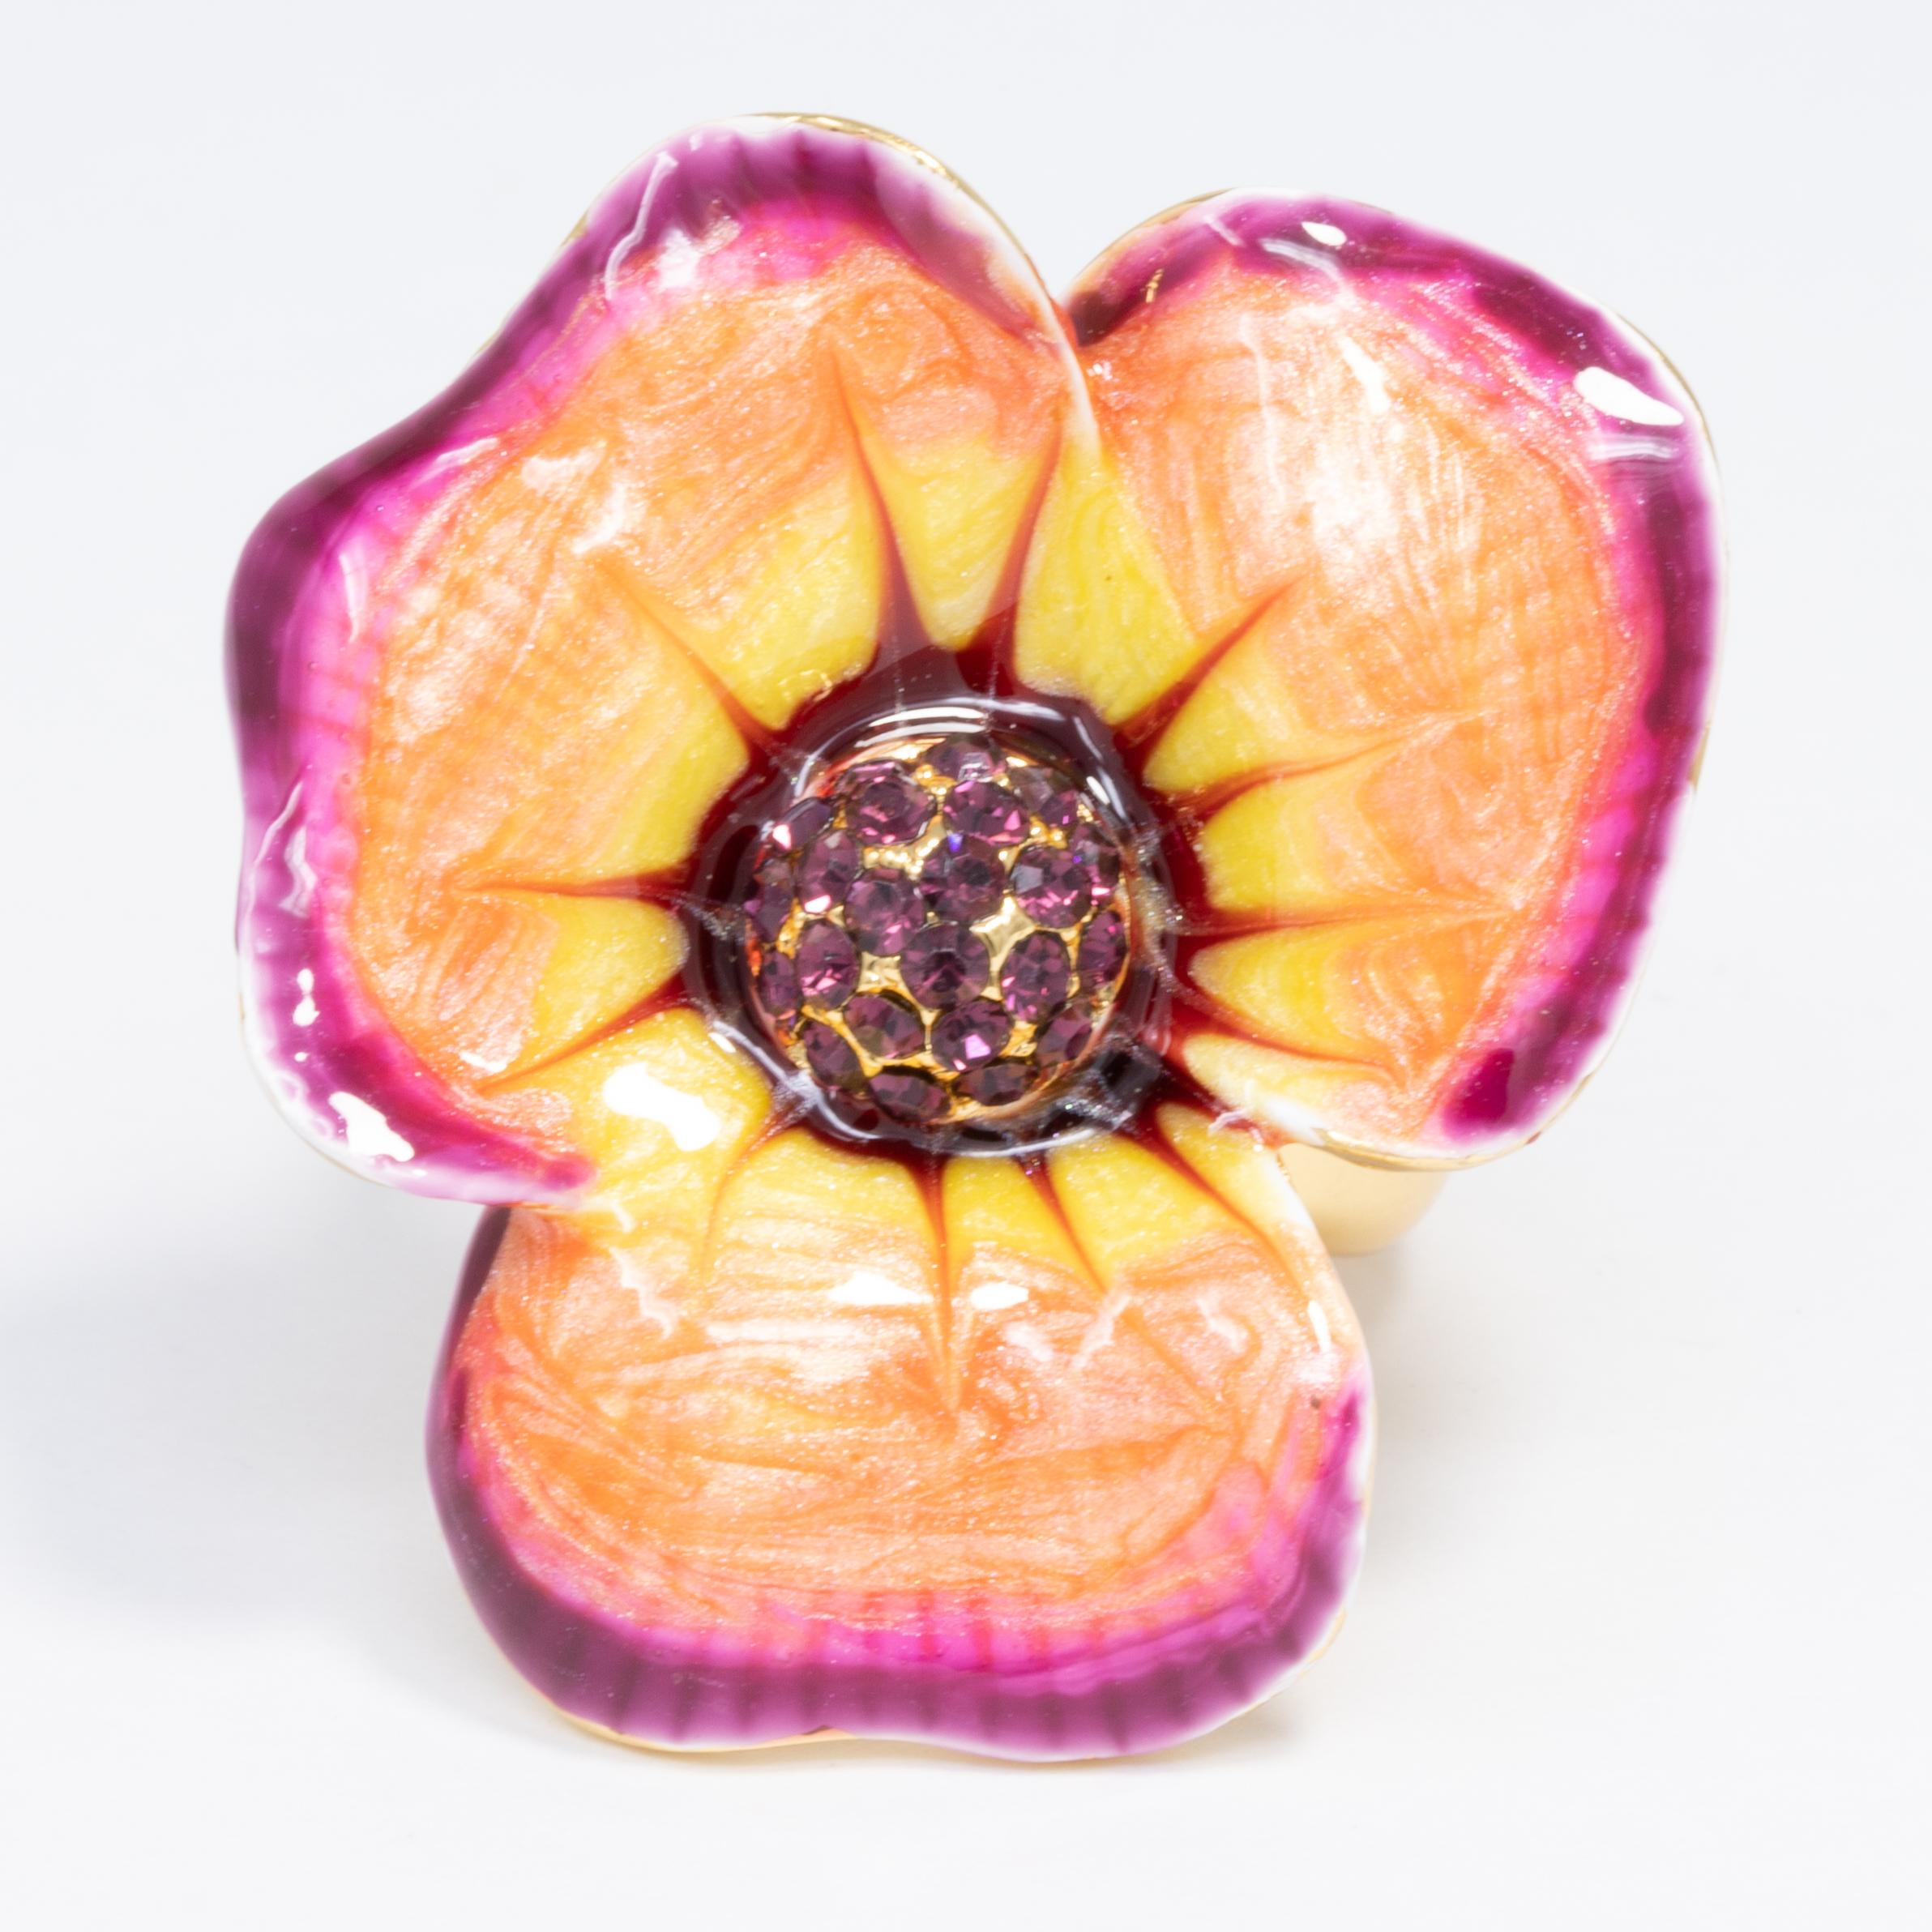 Flower power! An ornate floral statement ring featuring a blooming flower painted  purple and yellow enamel and accented with amethyst crystals. Set on gold plated metal.

Ring size US 8.5

Hallmarks: Jay, Jay Strongwater, CN

By Jay Strongwater,